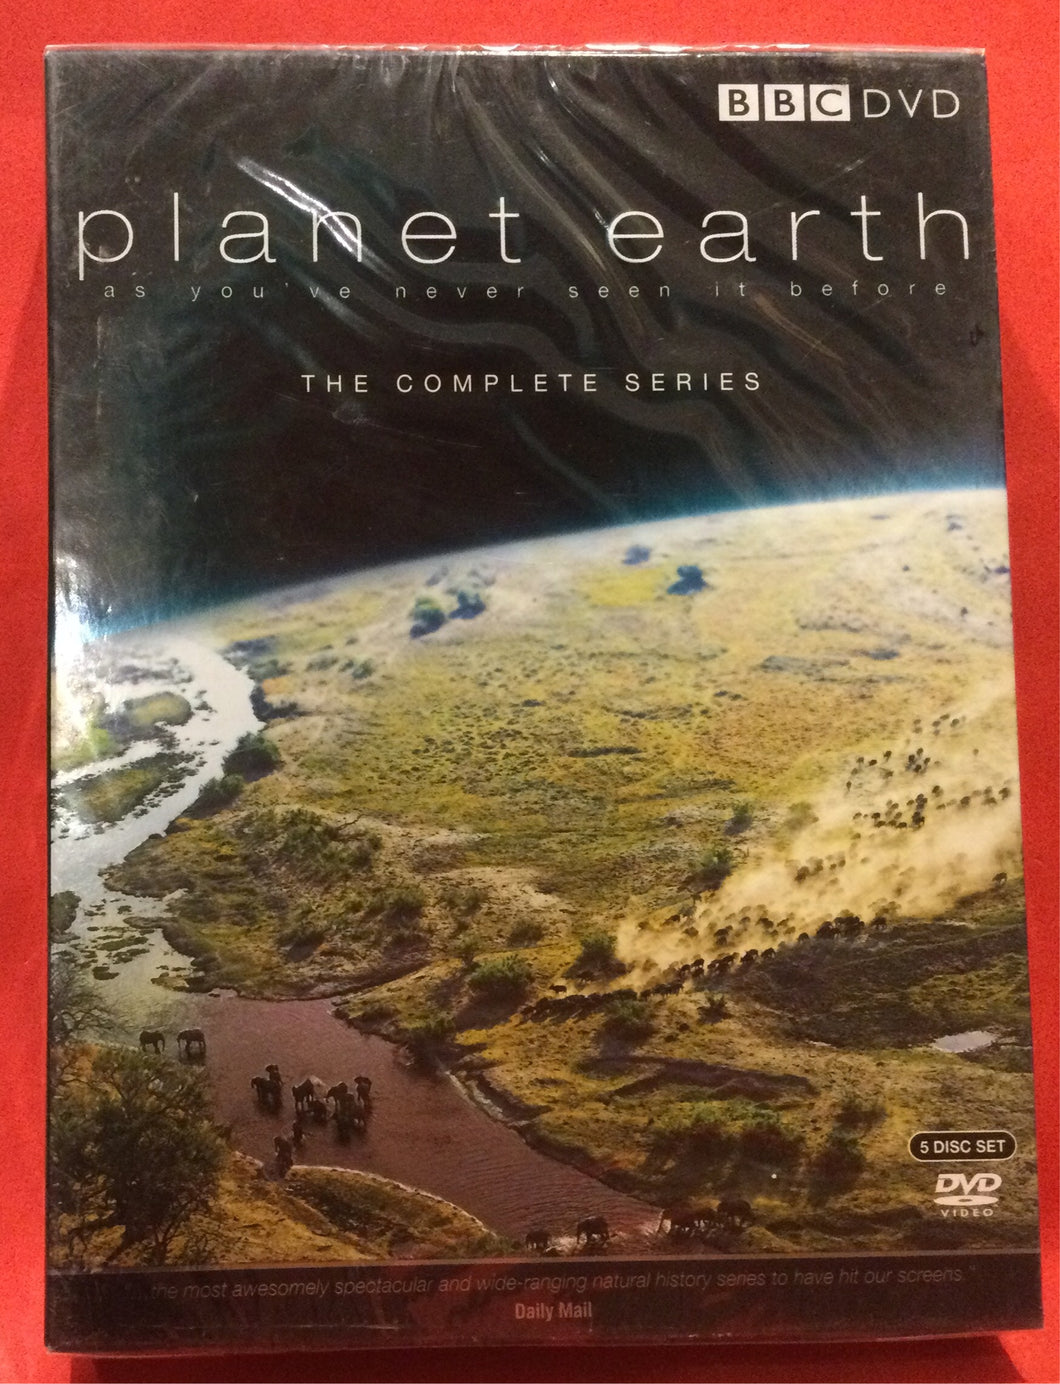 PLANET EARTH - THE COMPLETE SERIES - 5 DVD DISCS (SEALED)